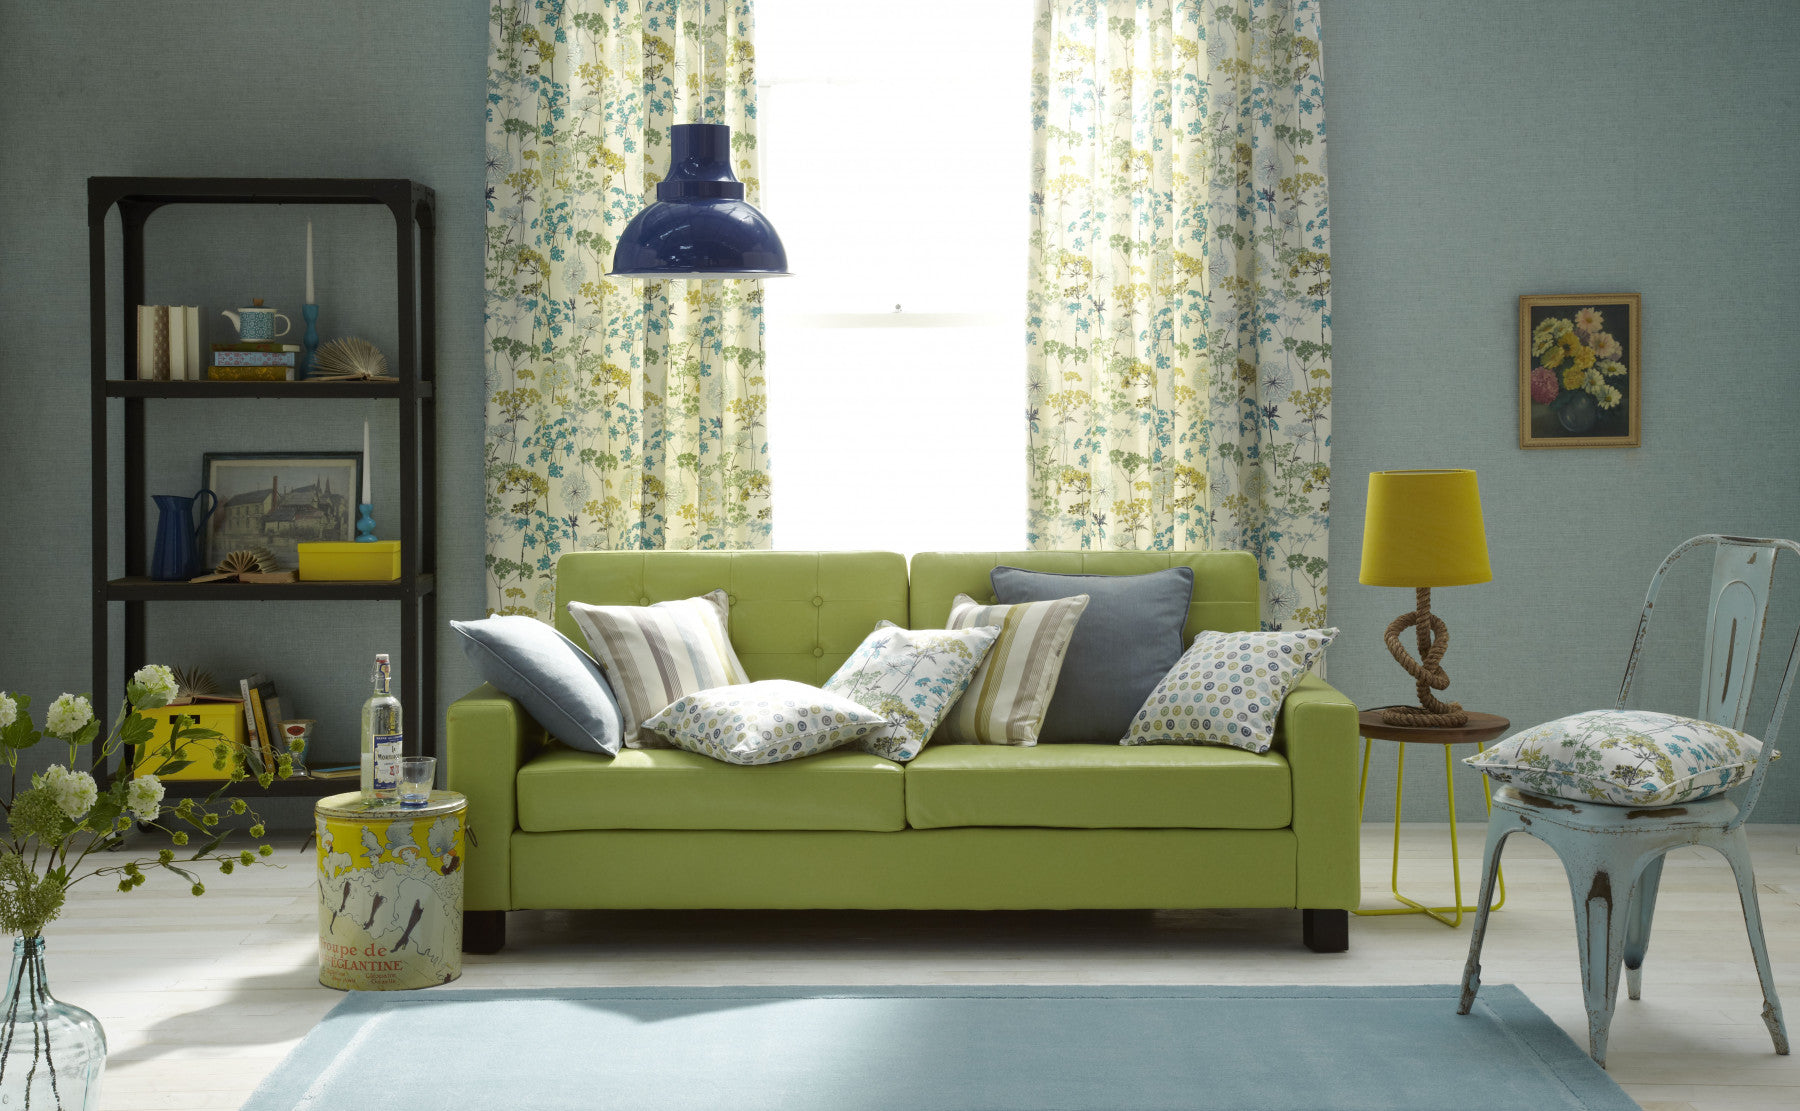 Fresh-looking living room with sofa and curtains made from I